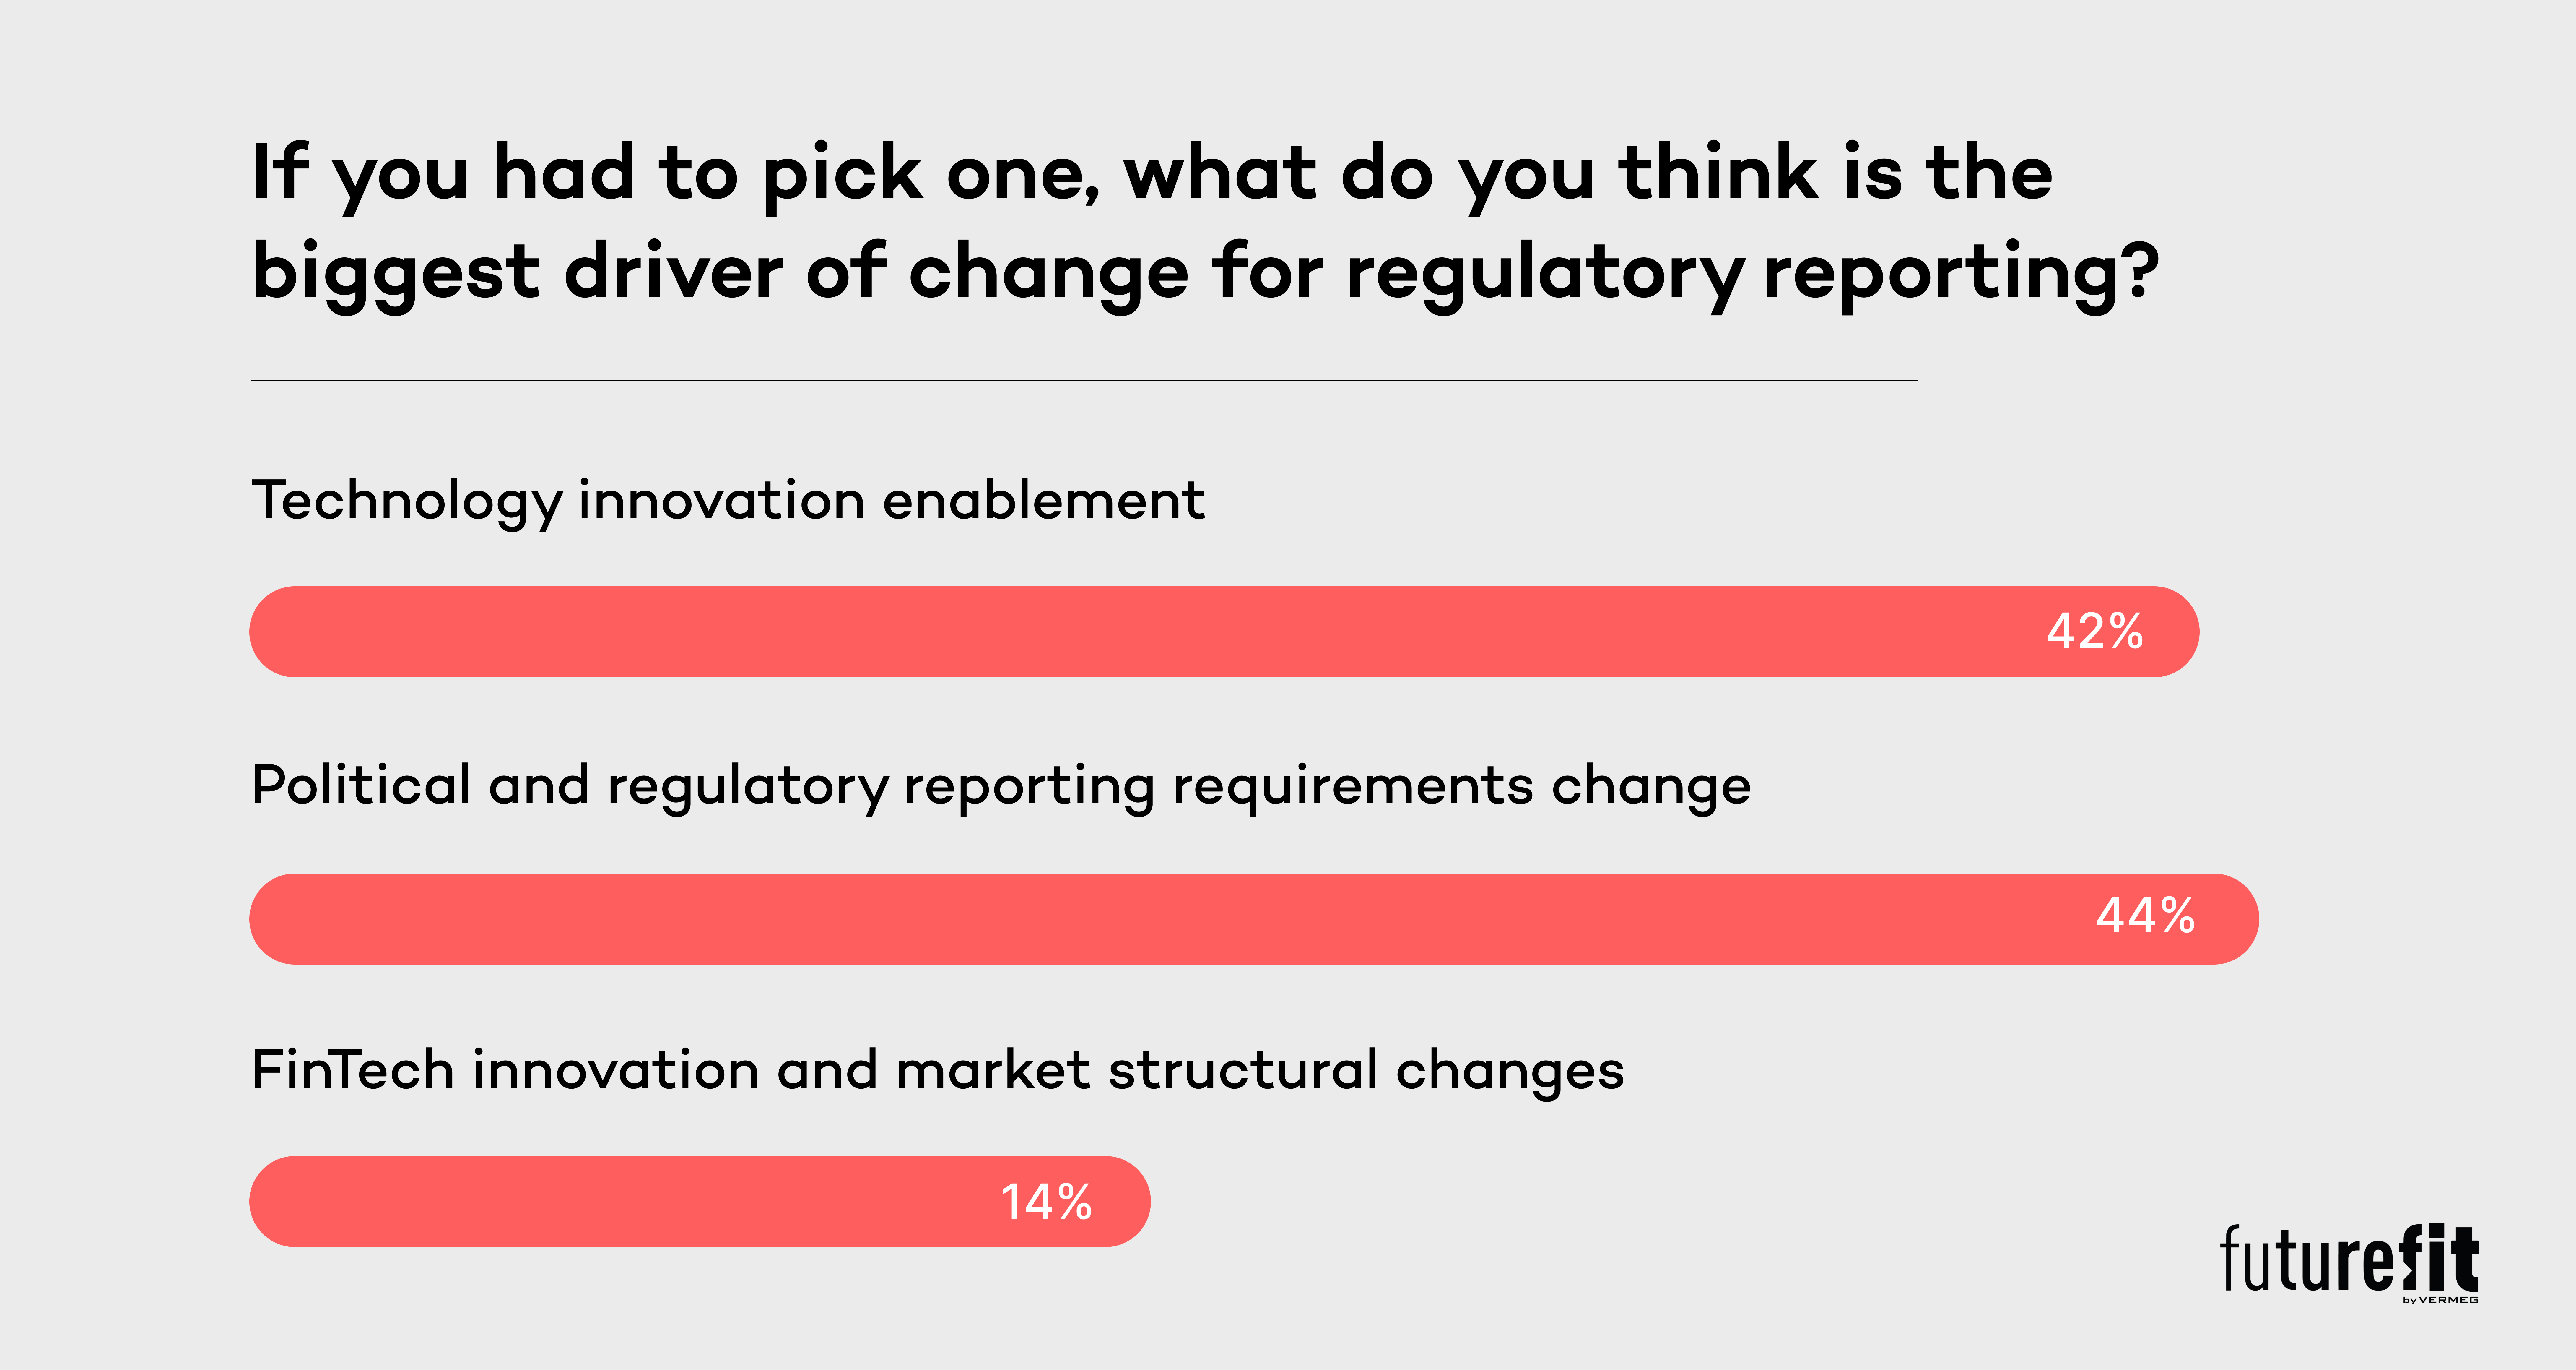 FutureFit Regulatory Reporting Polling in session question